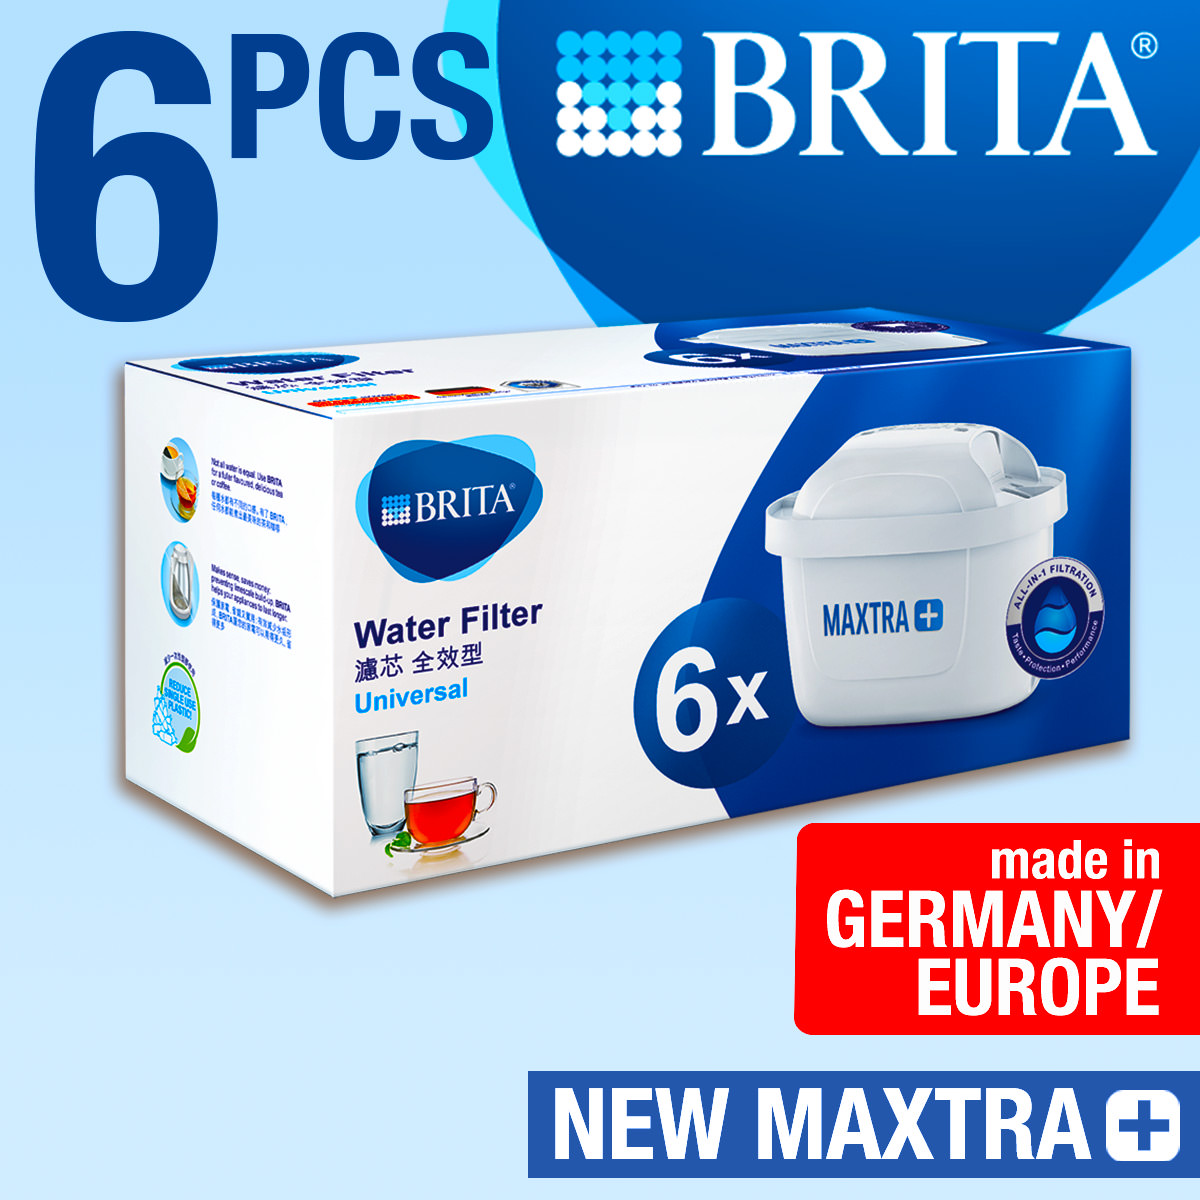 Brita MAXTRA + Micro Flow Cartridges 12 pcs (2 boxes of 6), Made in Germany  | Lazada Singapore